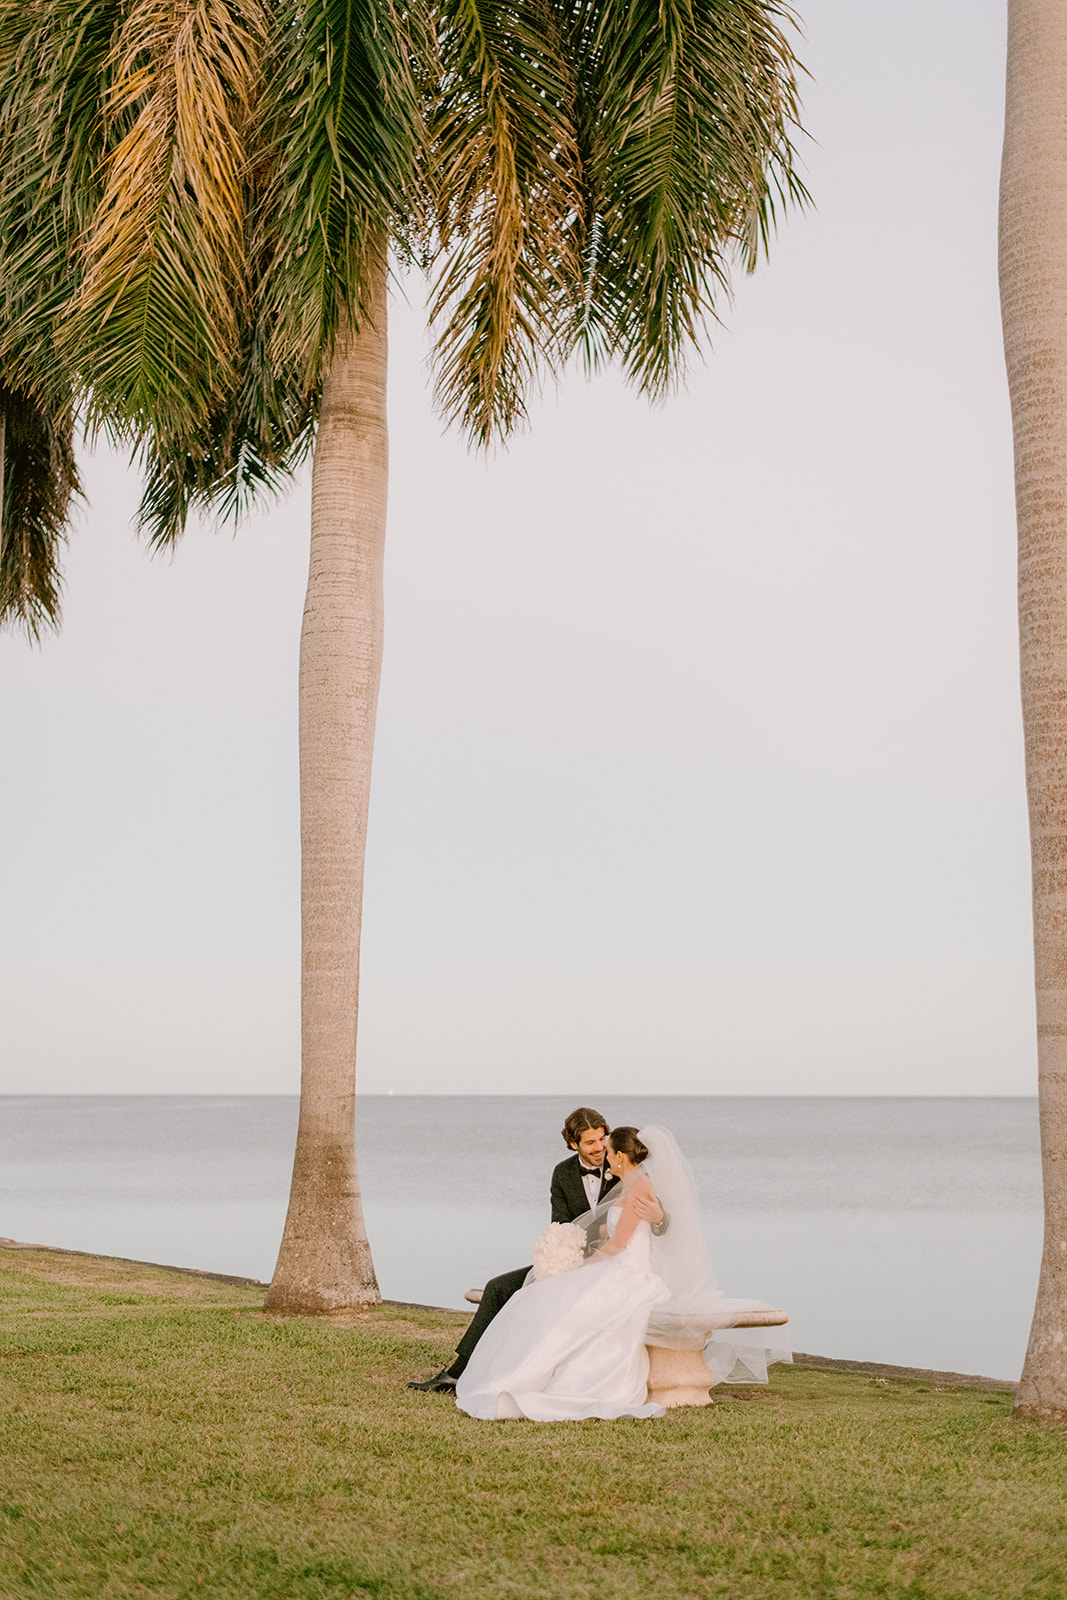 A perfect day captured by Miami Florida's top wedding photographer
